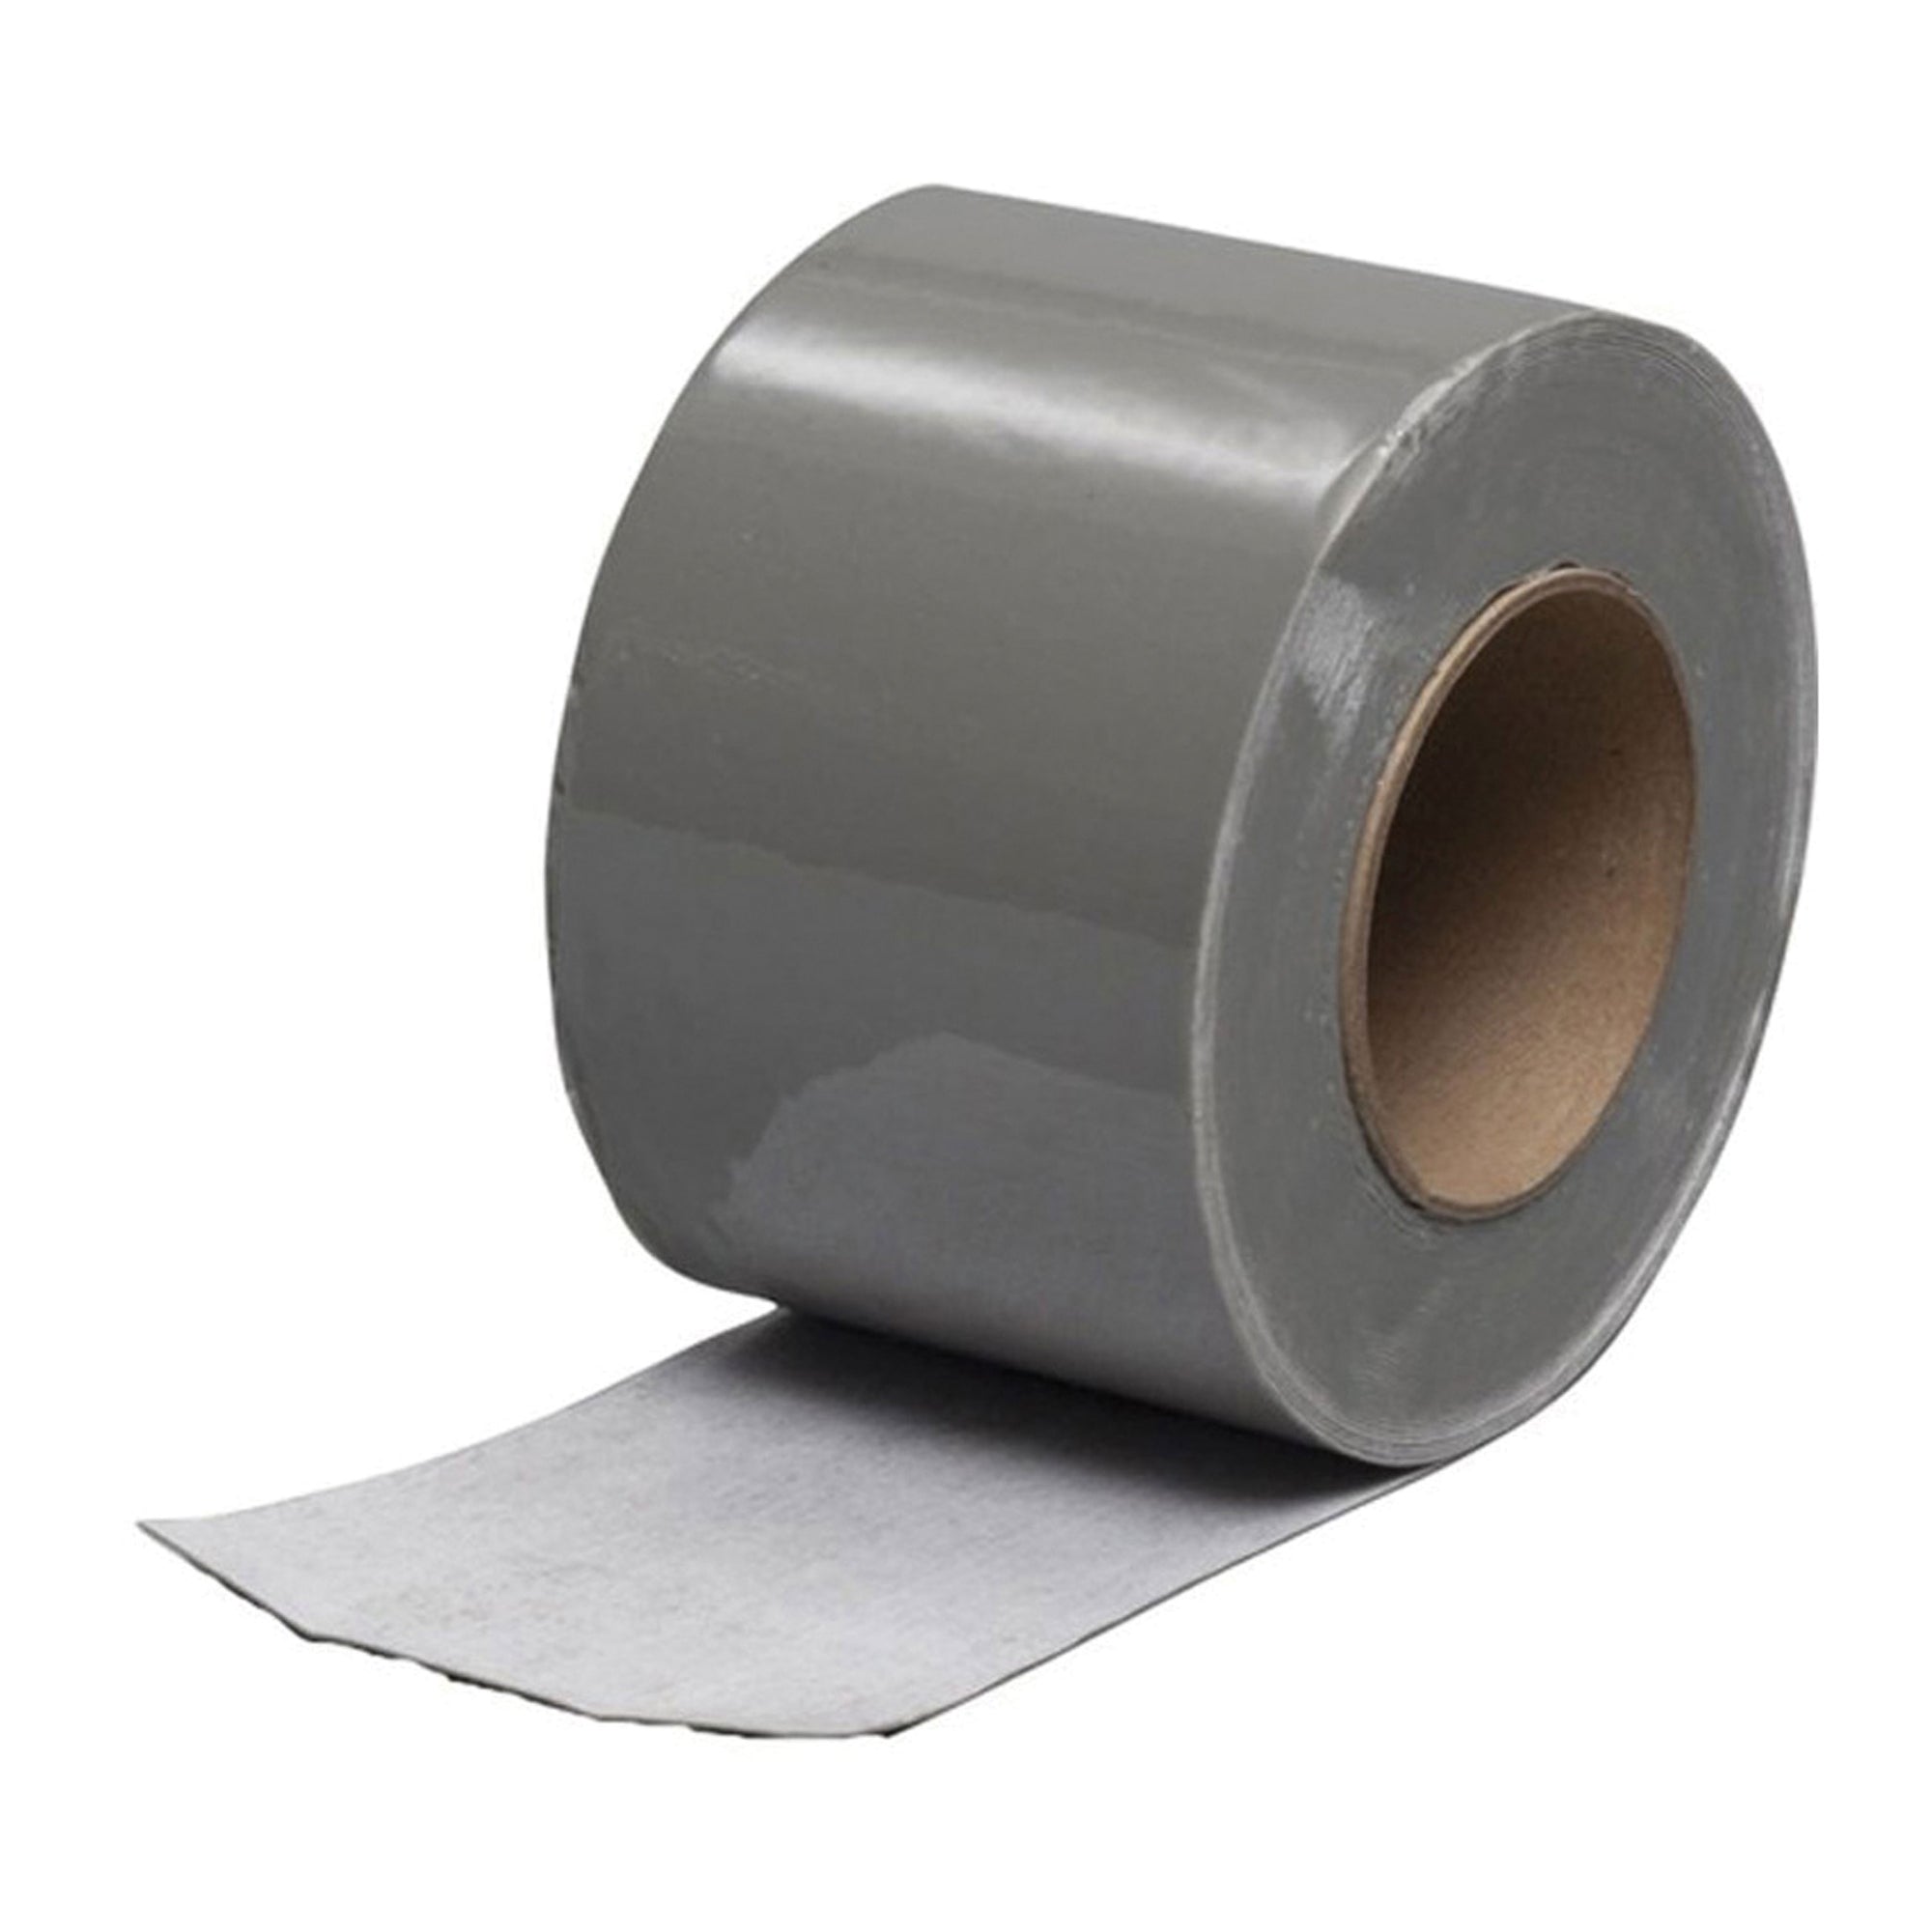 Dicor Corporation RP-CRCT-4-1C Coating Ready Cover Tape